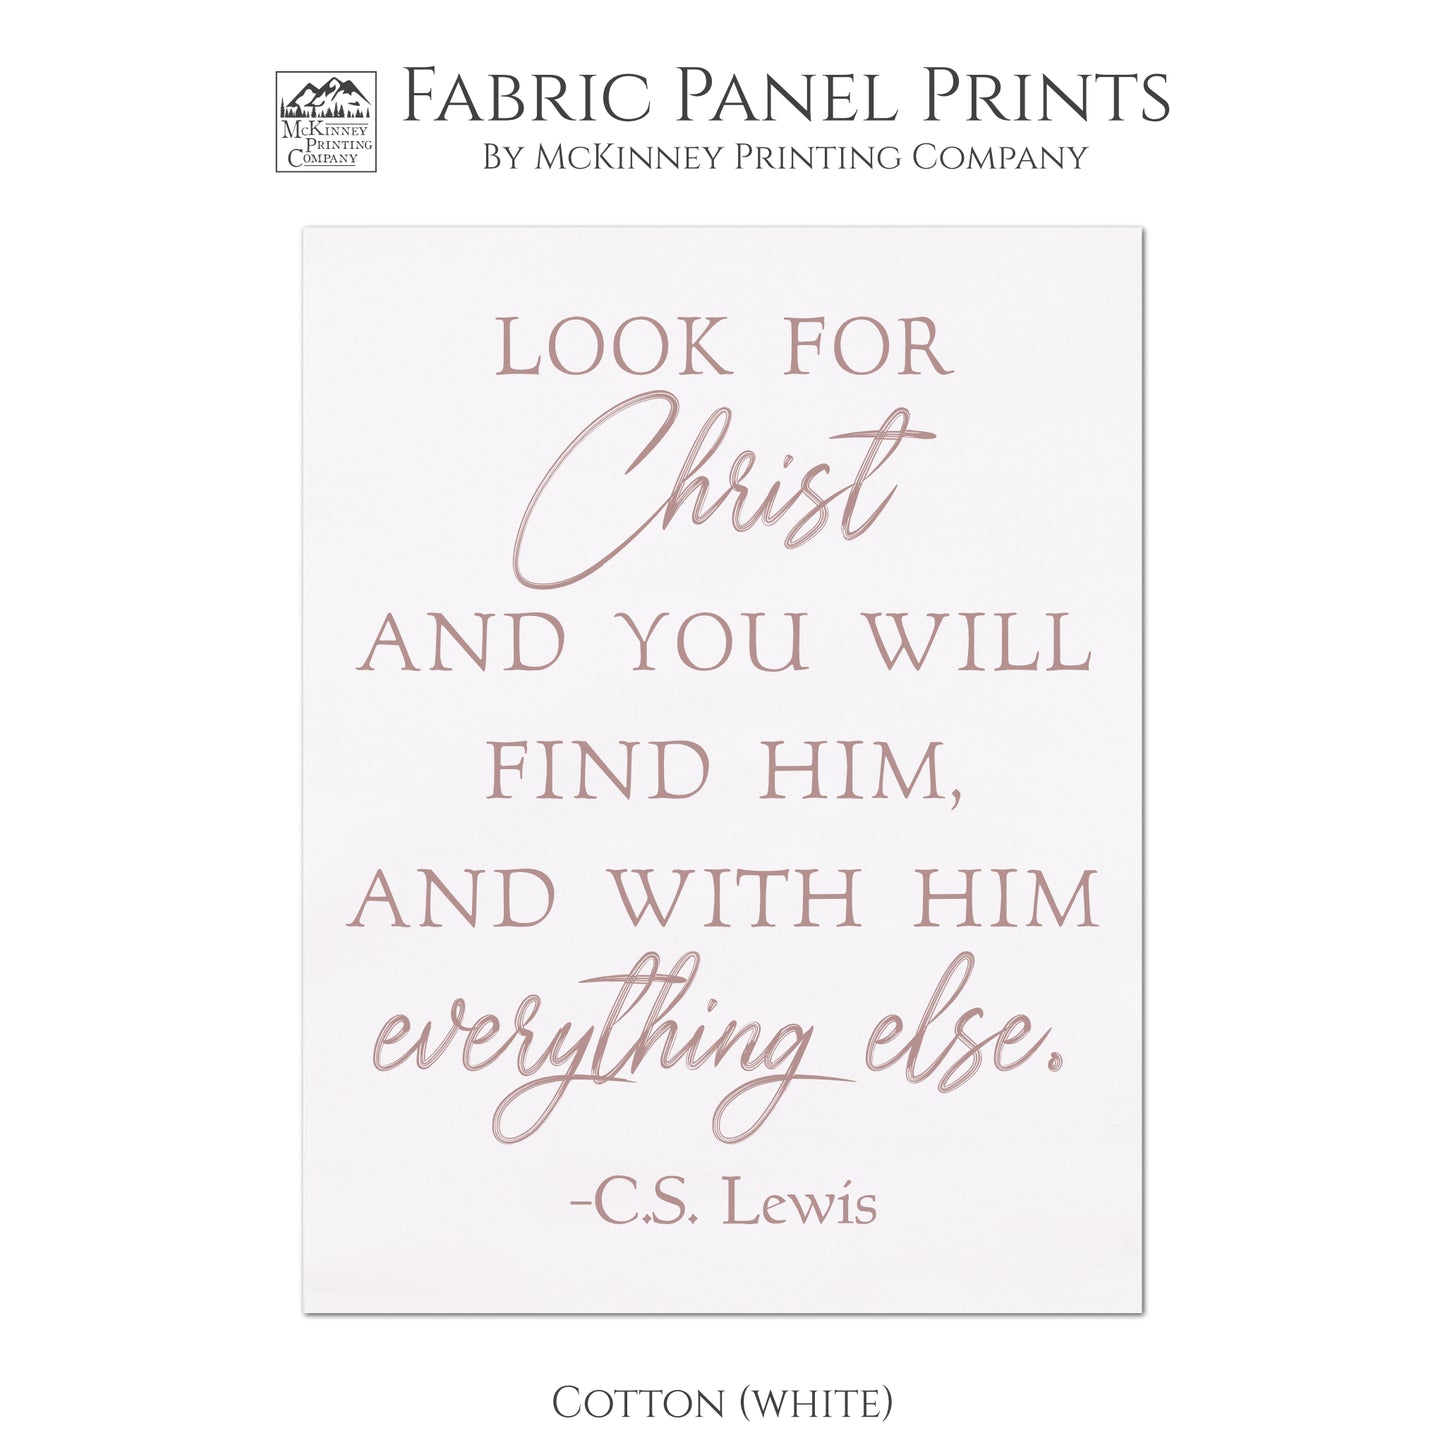 Look for Christ and you will find him, and with him everything else - CS Lewis Print, Fabric Panel, Wall Art, Quilt, Sewing - Cotton, White